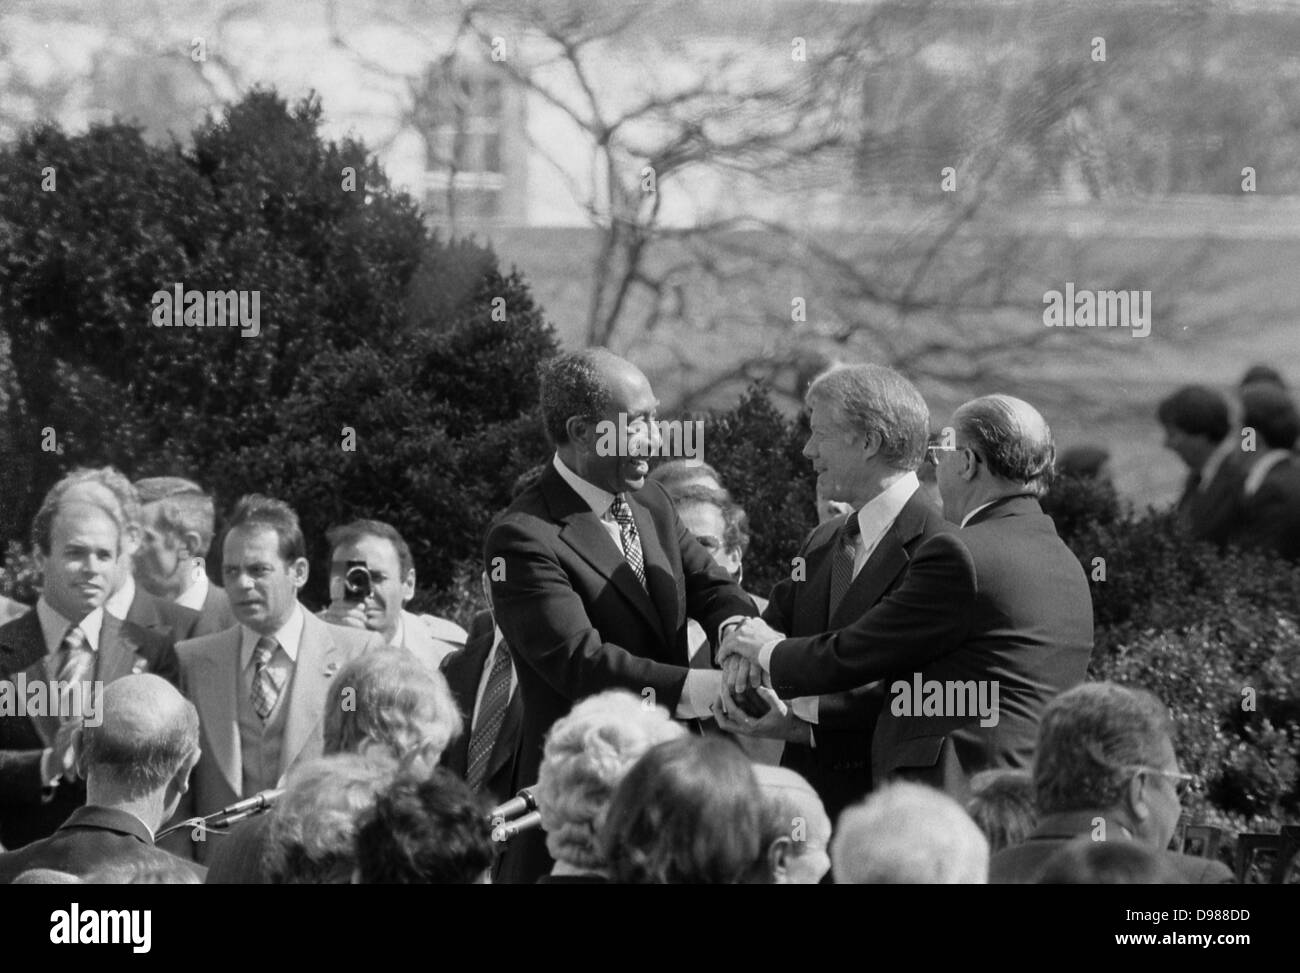 Egypt-Israel peace treaty: Jimmy Carter, President of the USA, shaking hands with Anwar Sadat, President of Egypt, and Menachem Begin, Prime Minister of Israel, at the signing of the Egyptian-Israeli Peace Treaty in the grounds of the White House, Washington, 26 March 1979. Photographer, Warren K Leffler. Stock Photo